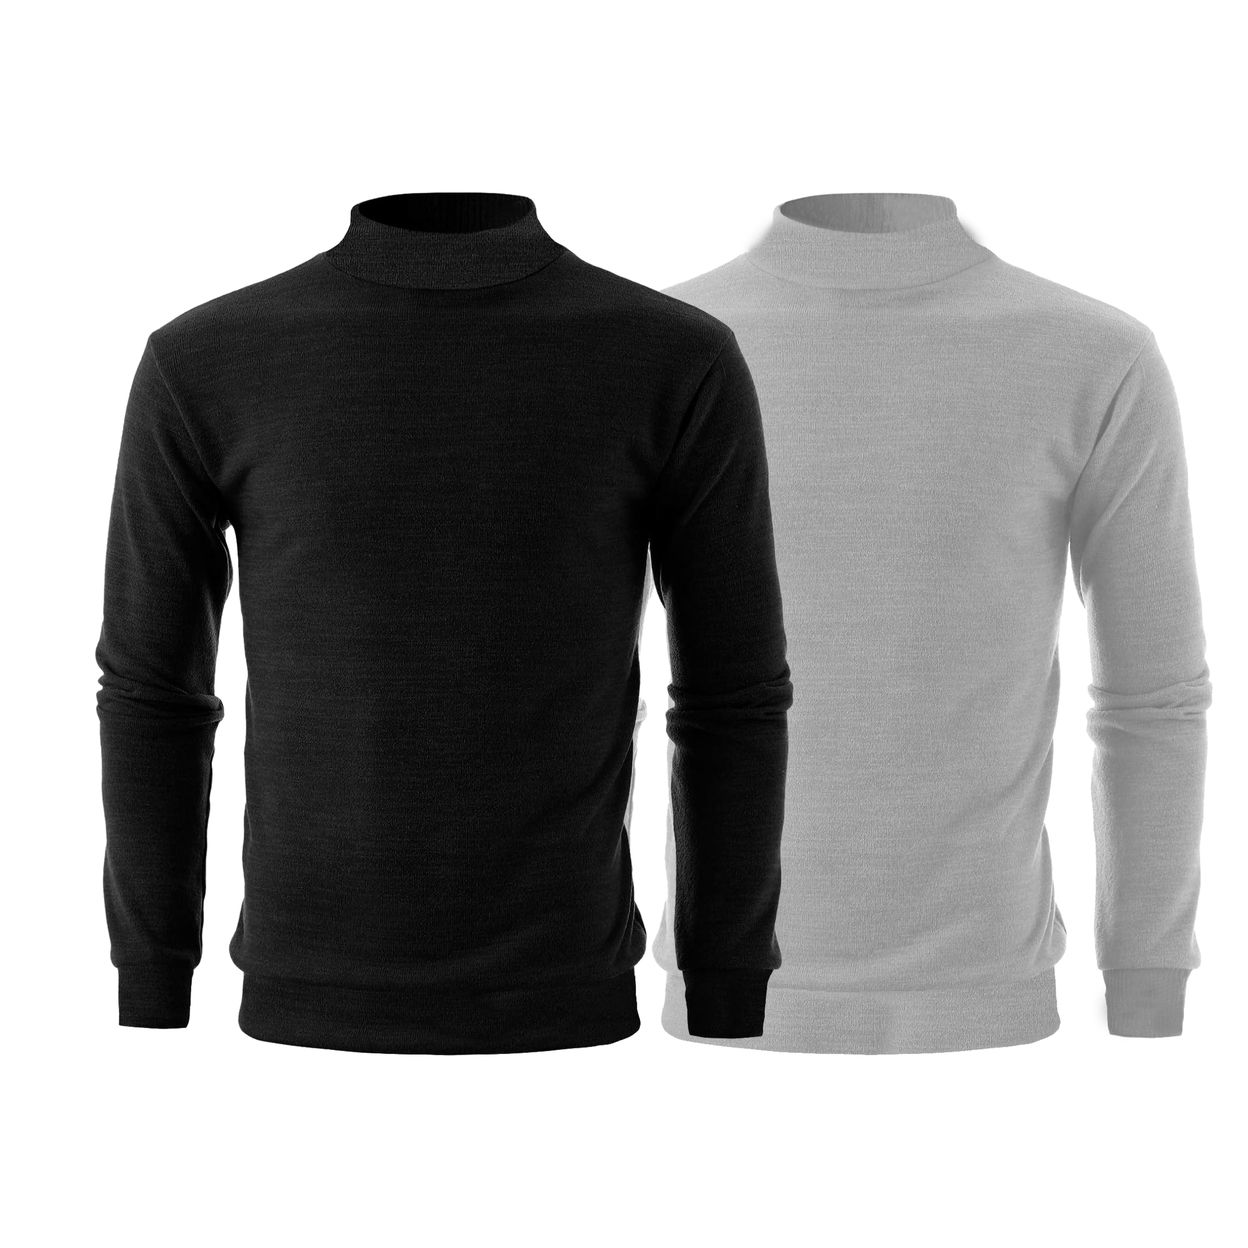 2-Pack: Men's Winter Warm Cozy Knit Slim Fit Mock Neck Sweater - White & White, X-large